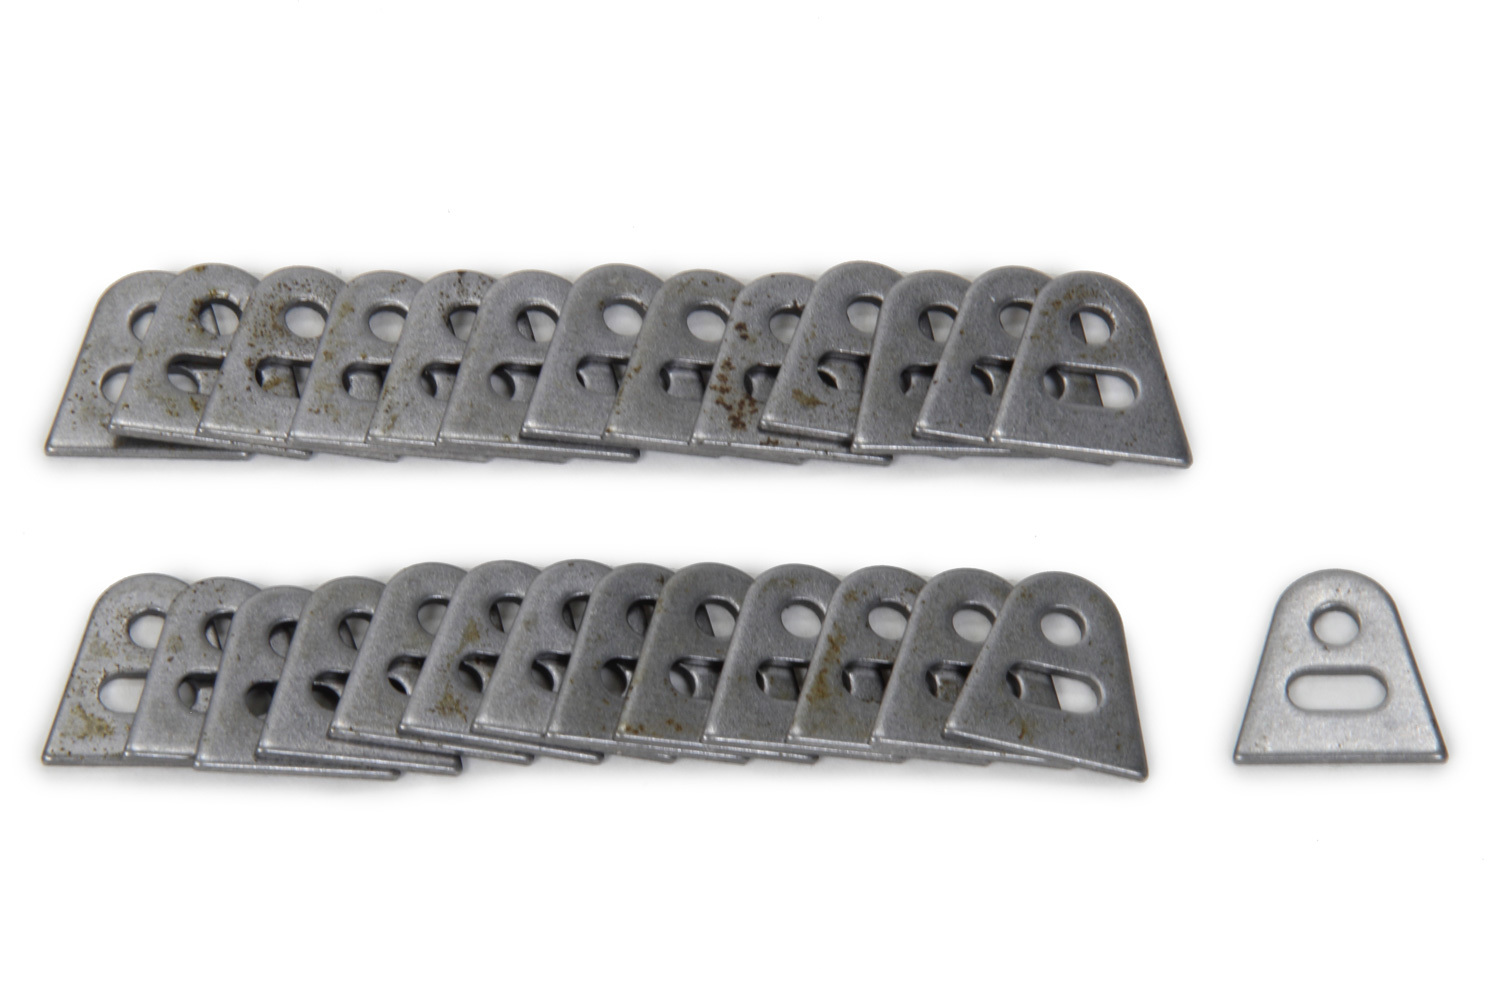 Chassis Engr Window Mounting Tabs (25-Pieces)